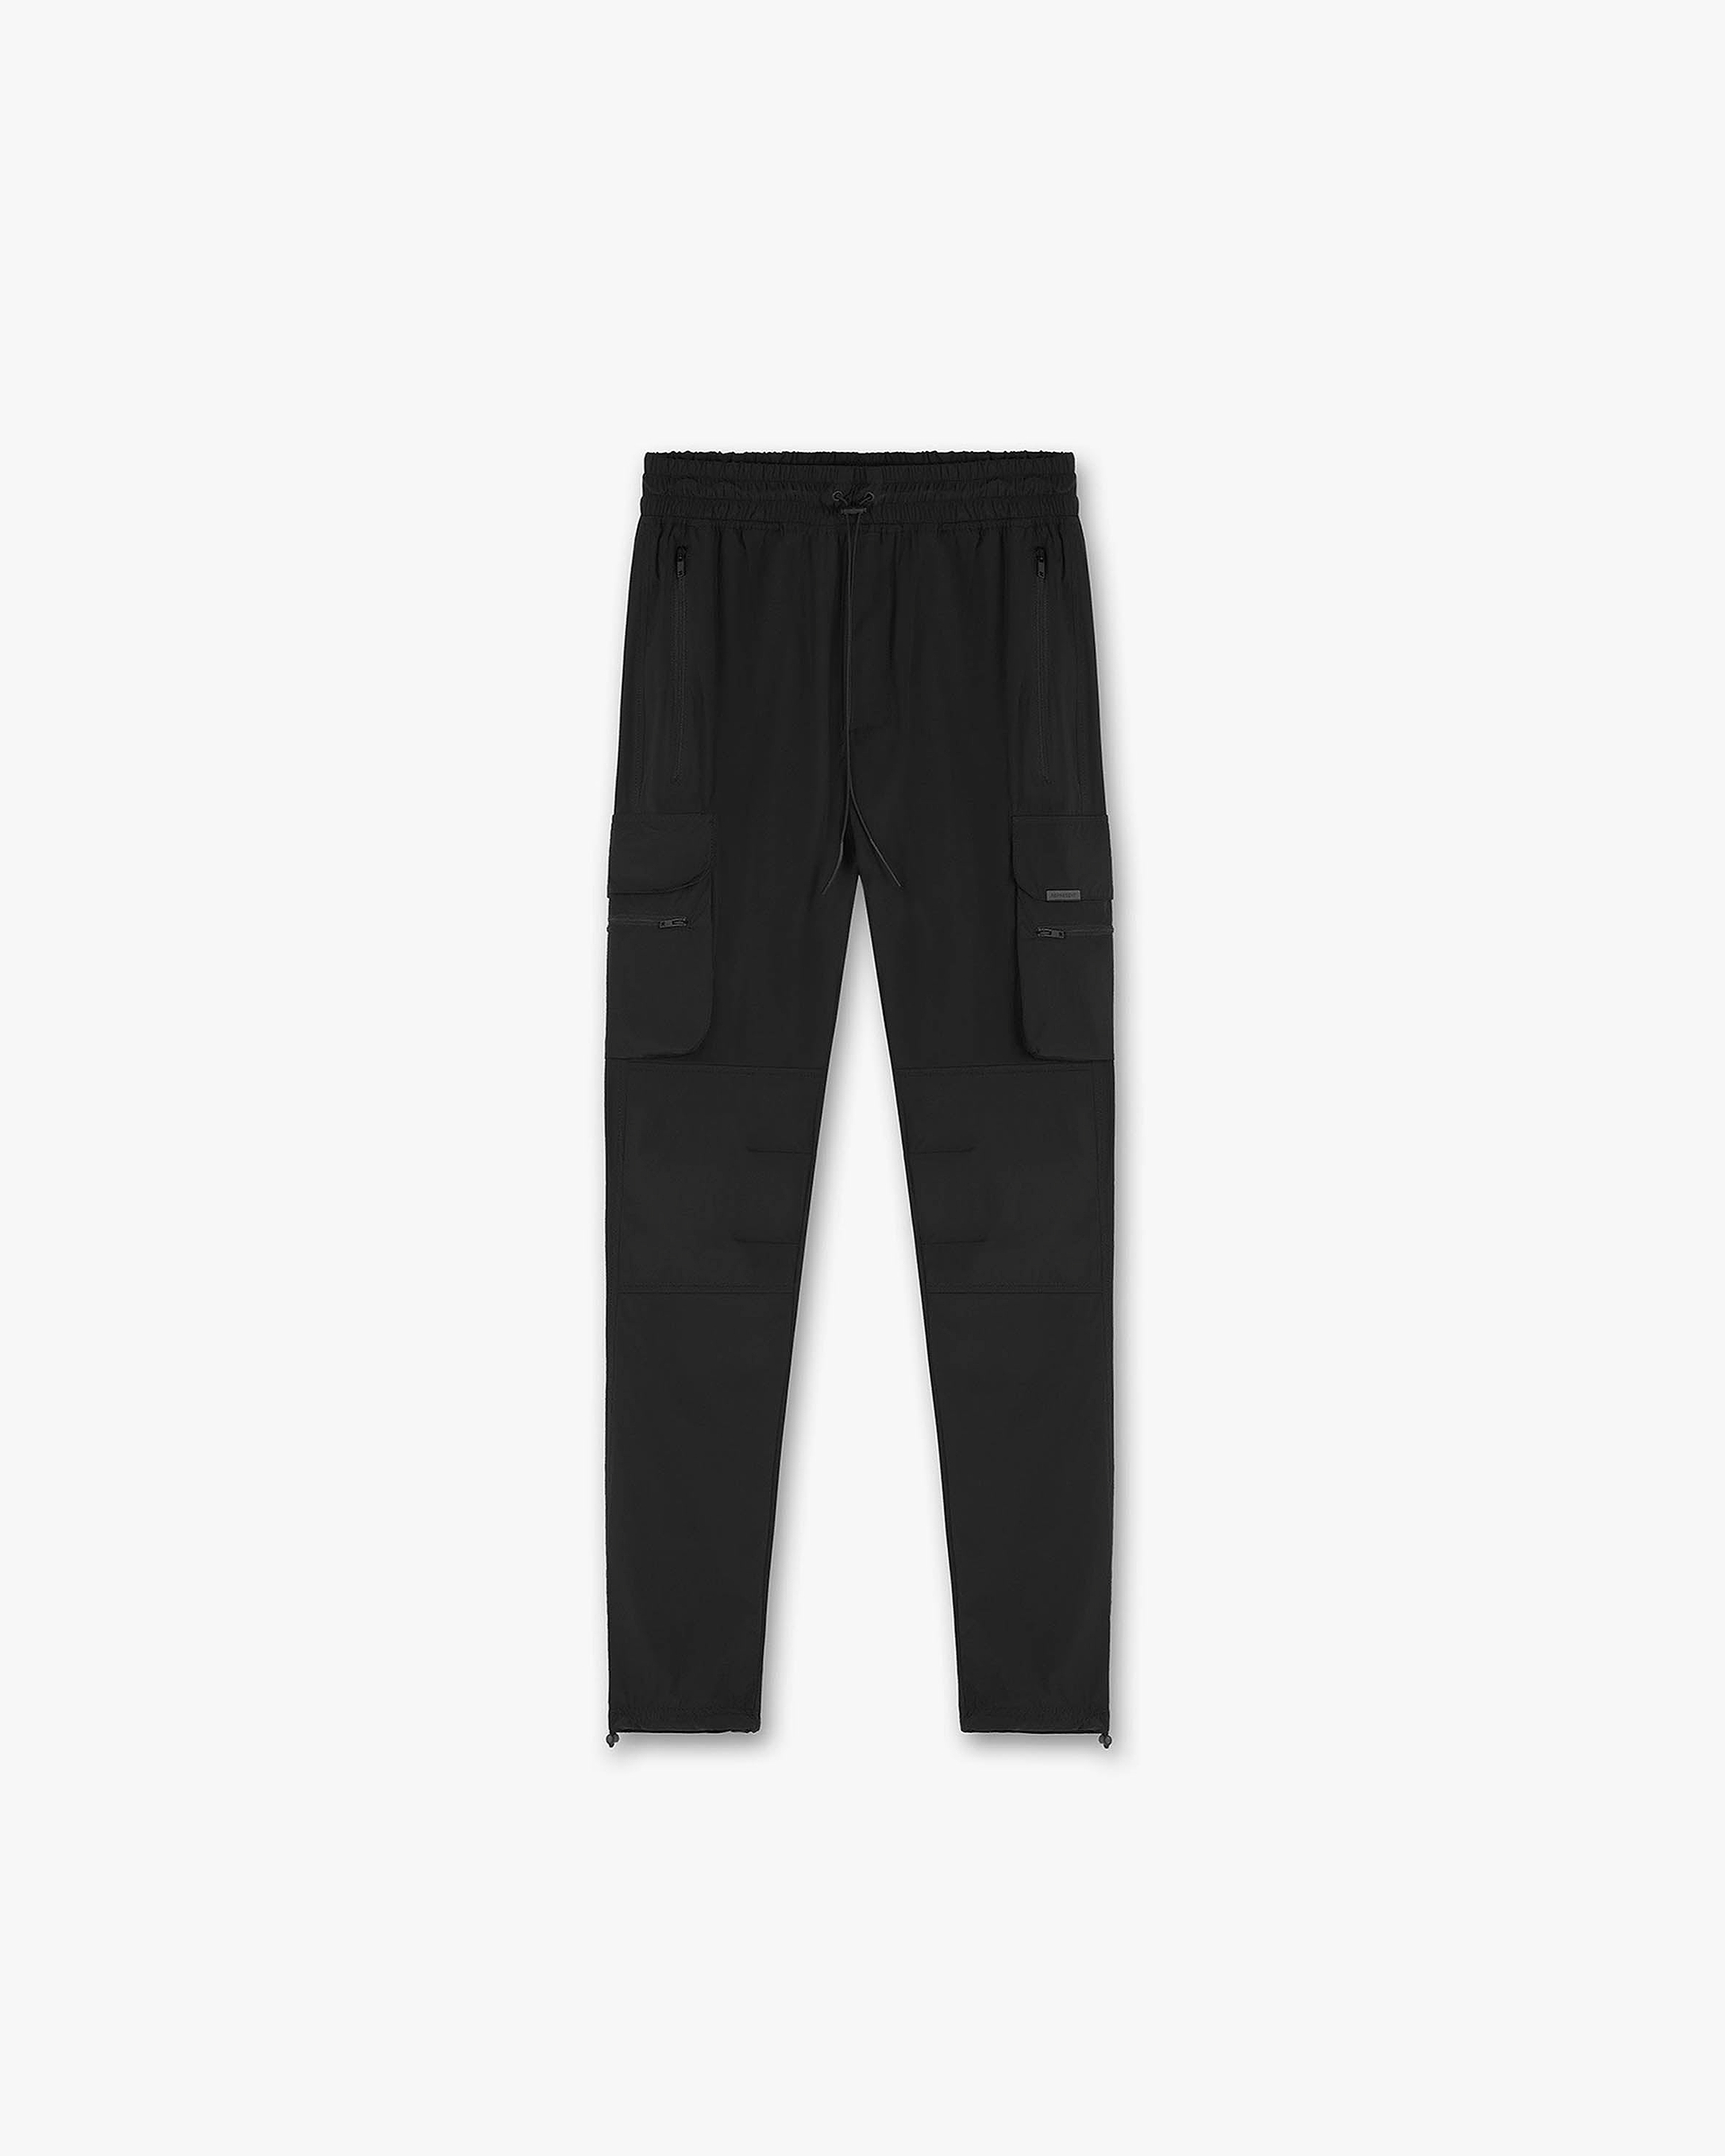 Men's Track Pants & Sets. Find Men's Casual and Athletic pants in all Sizes  and Styles, Offers Stock